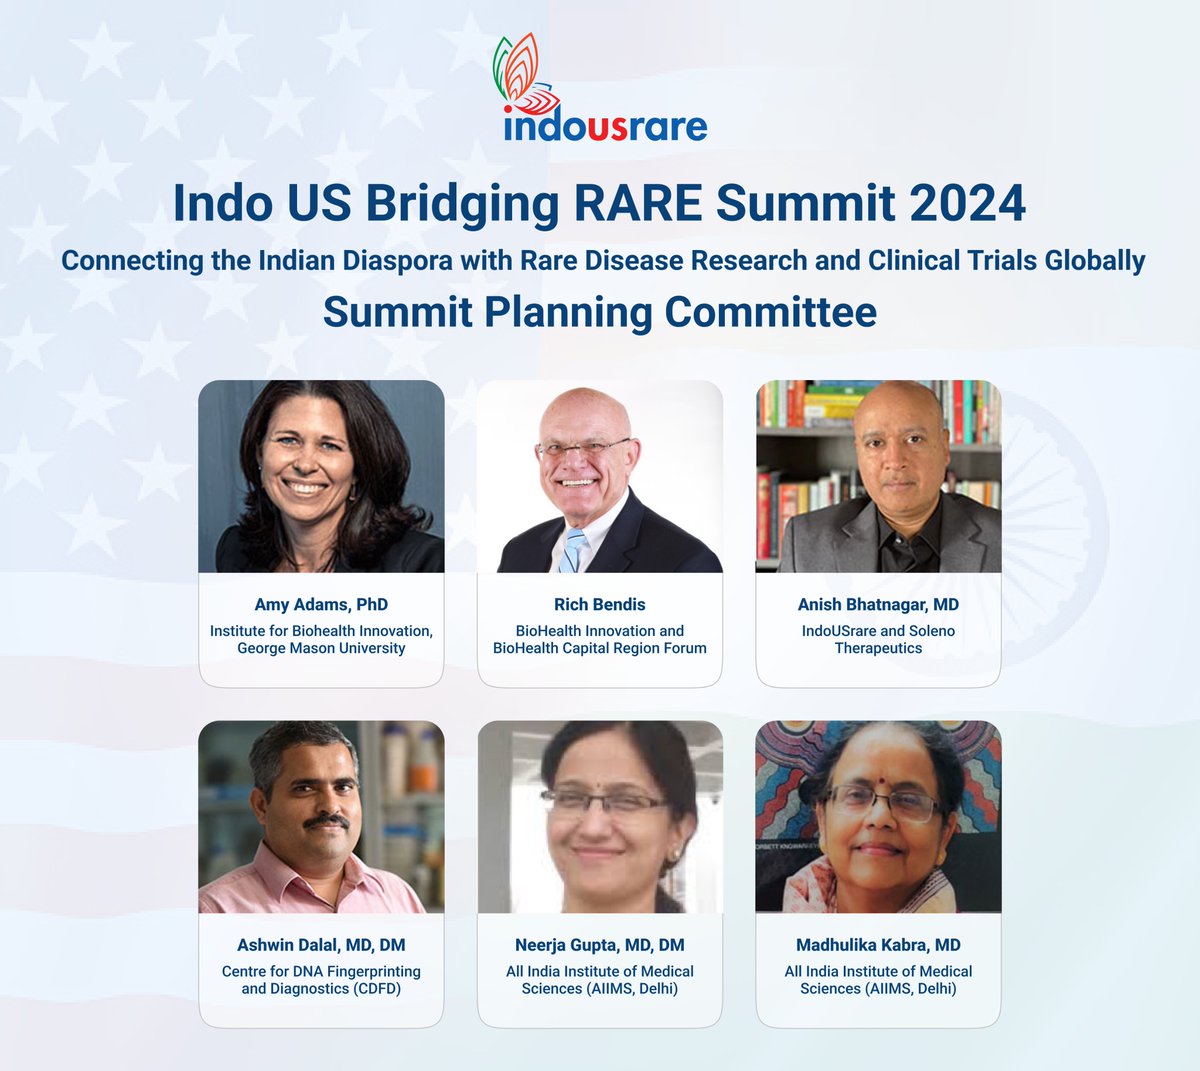 Planning committee announced!!! Introducing the esteemed Summit Planning Committee for our highly anticipated event of the year! - Indo US Bridging RARE Summit 2024! Stay tuned for further updates regarding this transformative event! #BridgingRARESummit #bridgingrare #bridge4rare